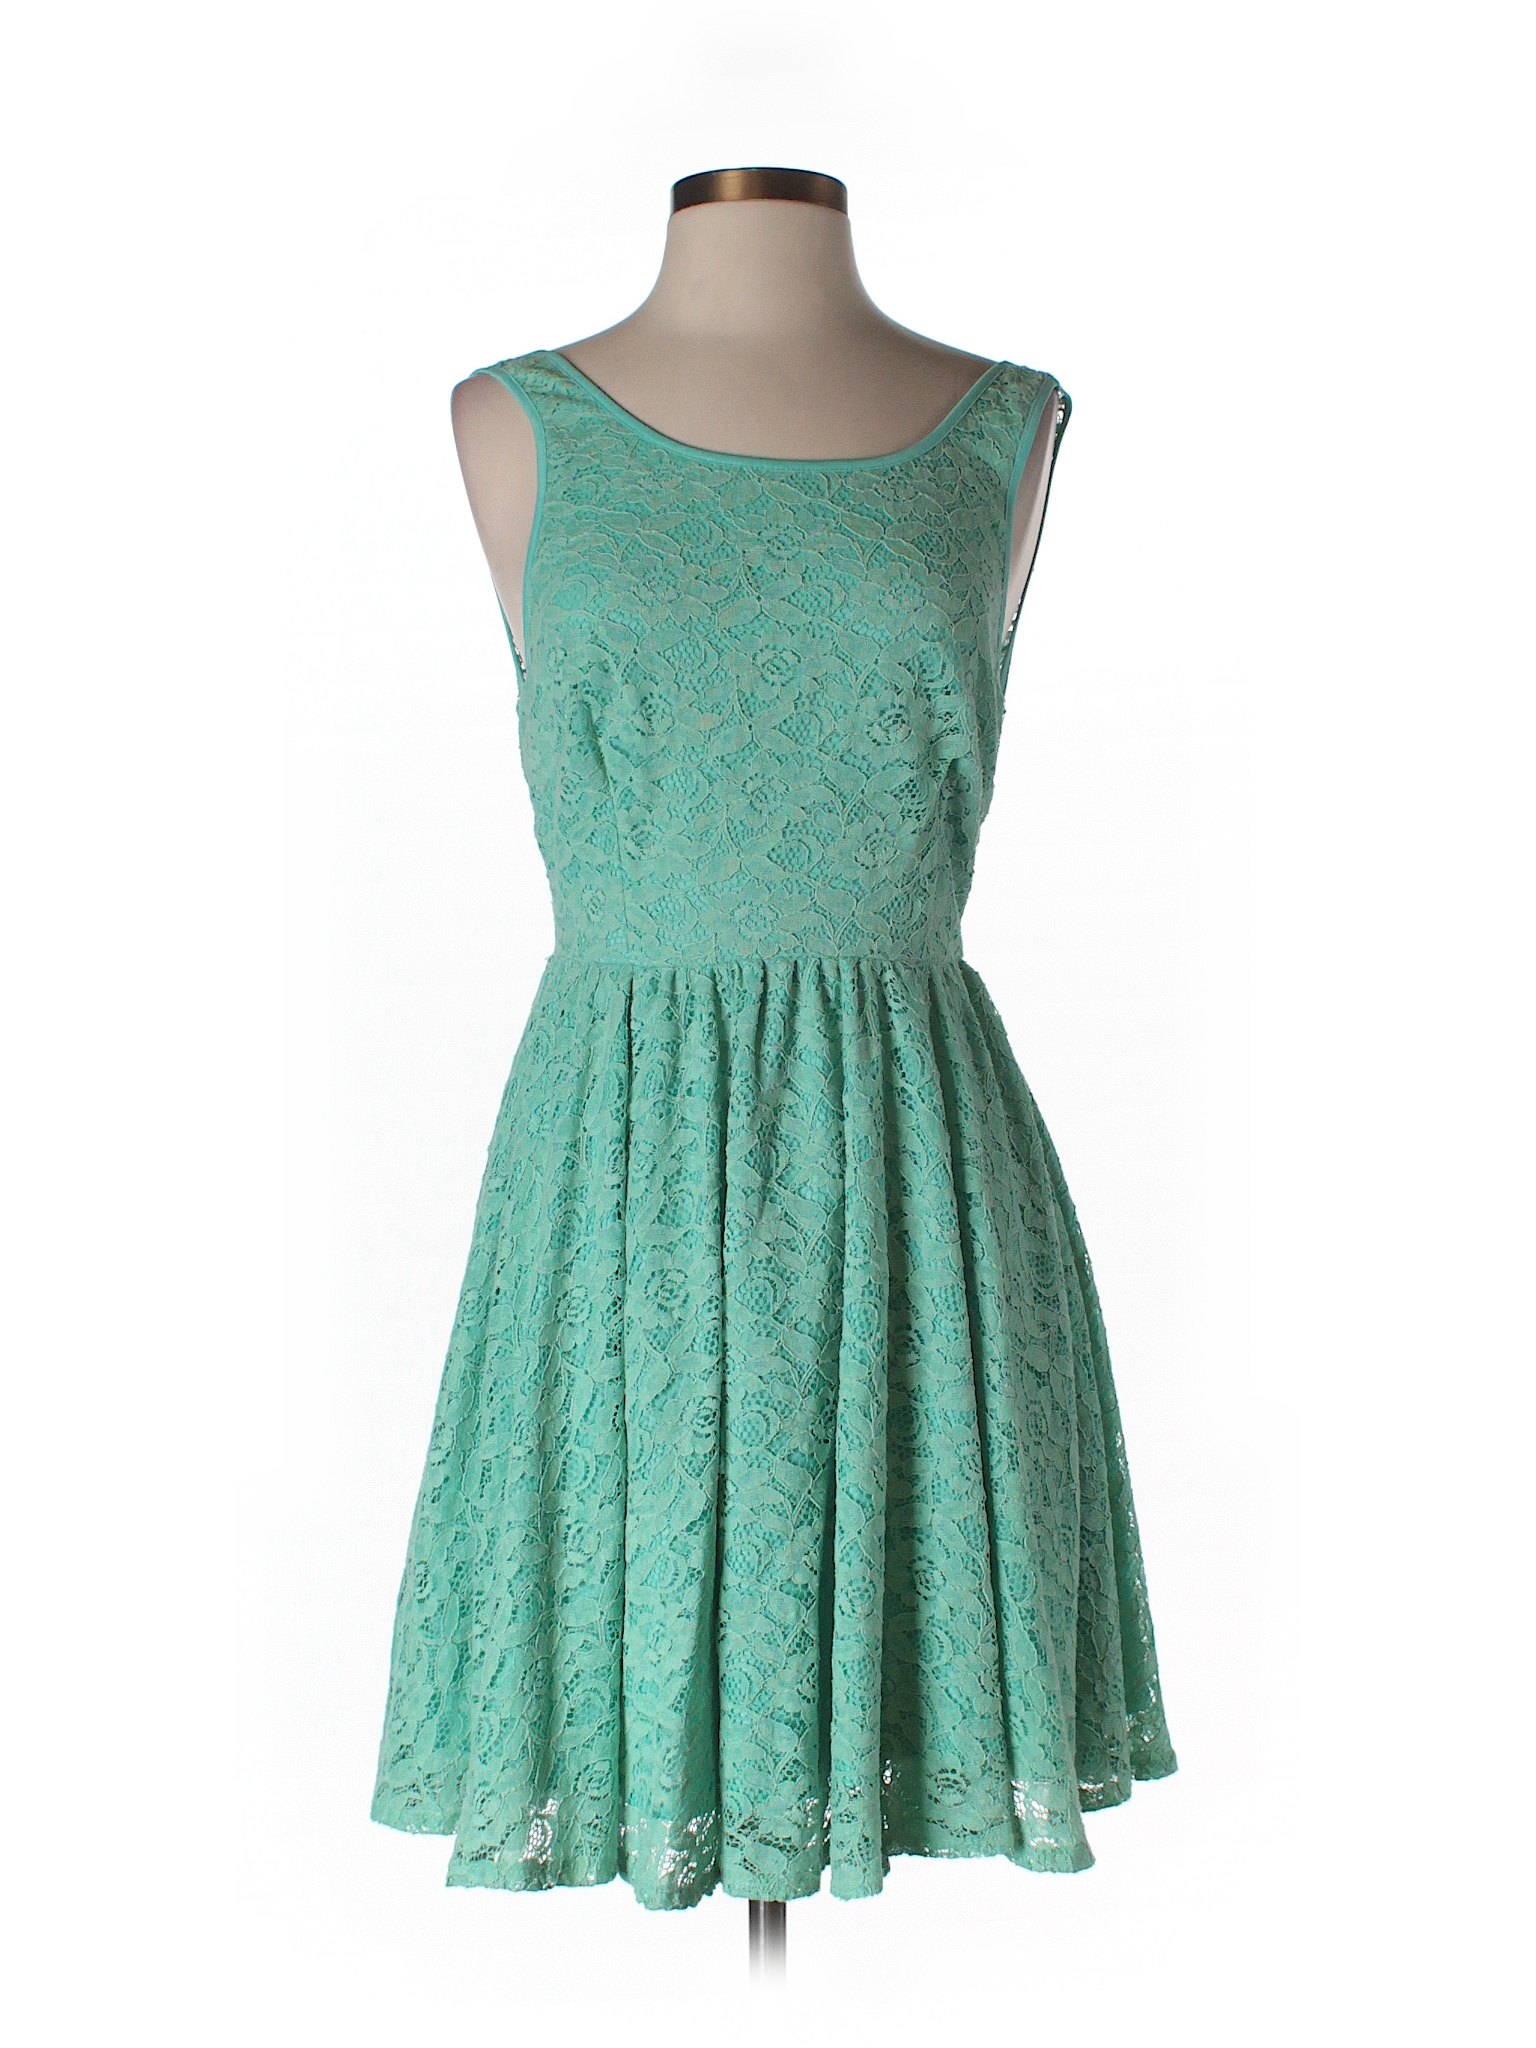 Pins and Needles Lace Green Casual Dress Size 4 - 74% off | thredUP